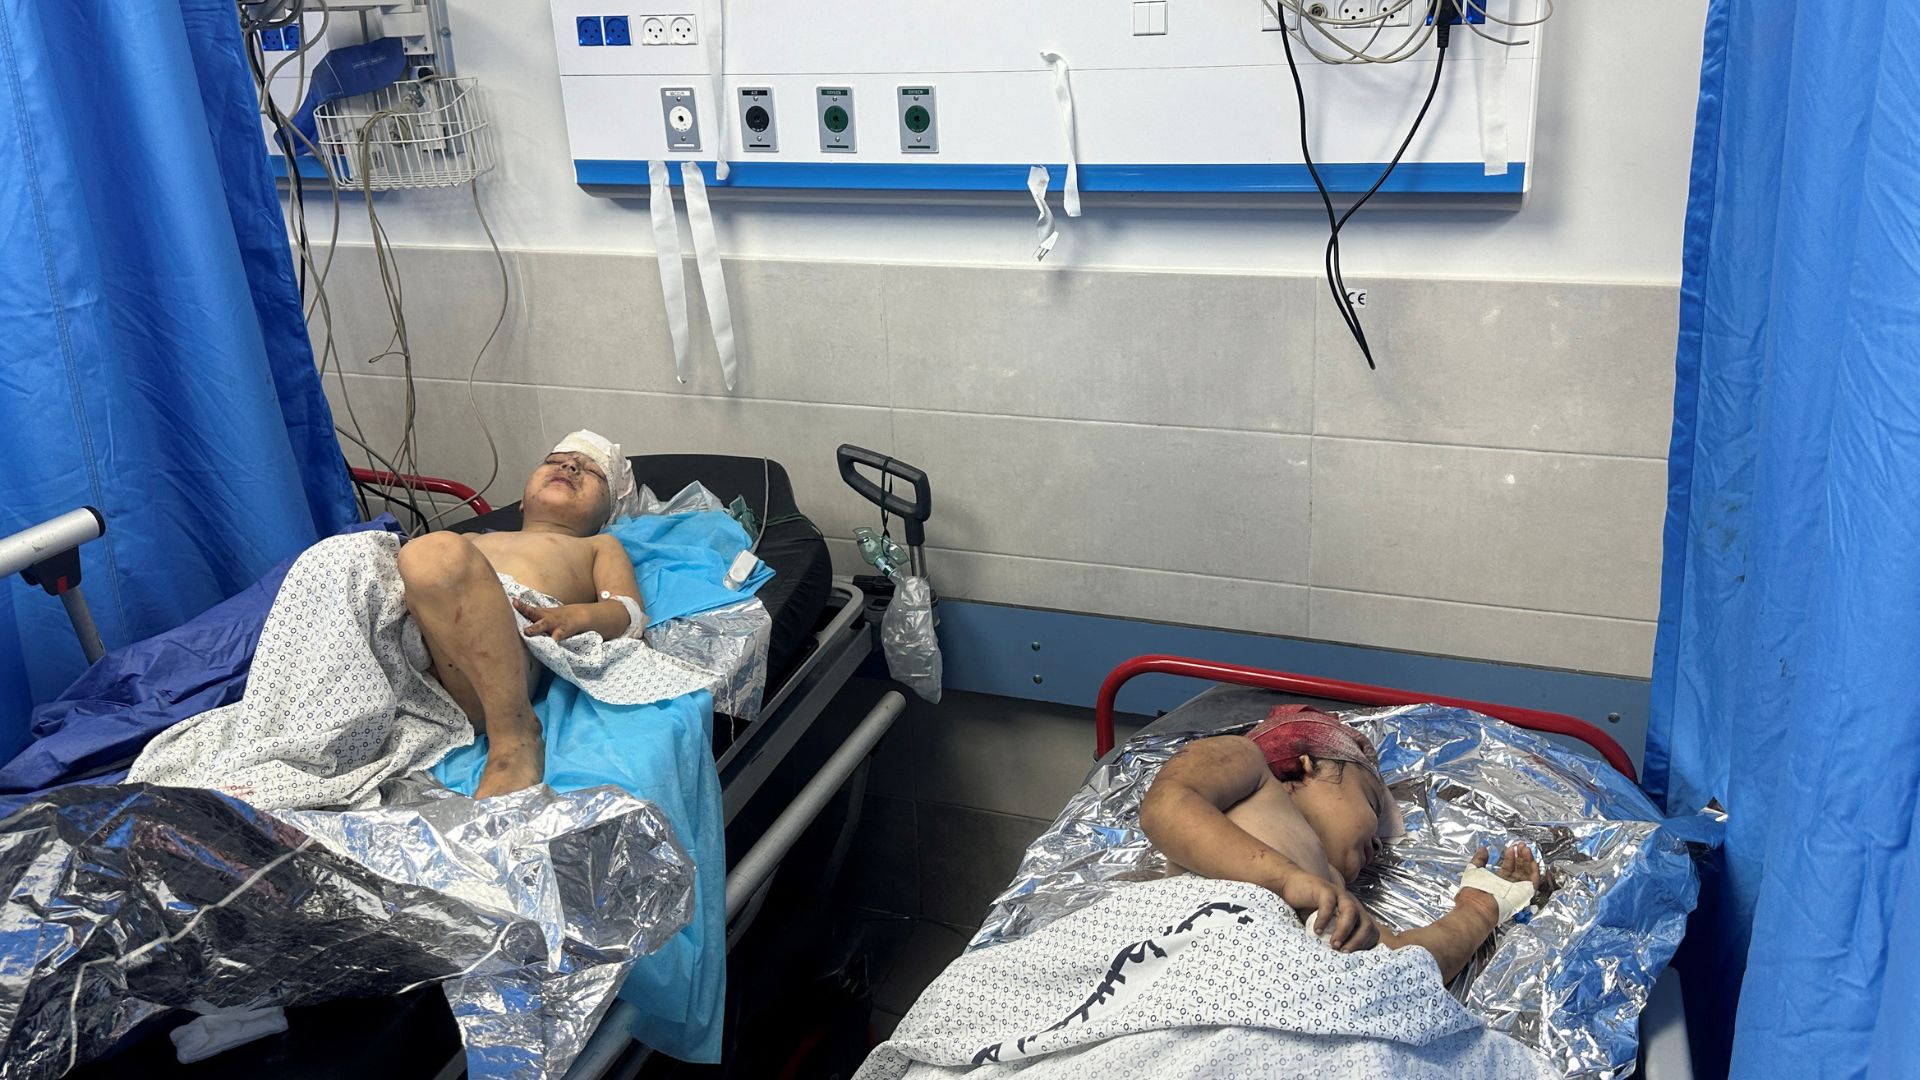 Palestinian children wounded in Israeli strikes receive treatment in a hospital in Gaza city. /Mohammed Salem/Reuters